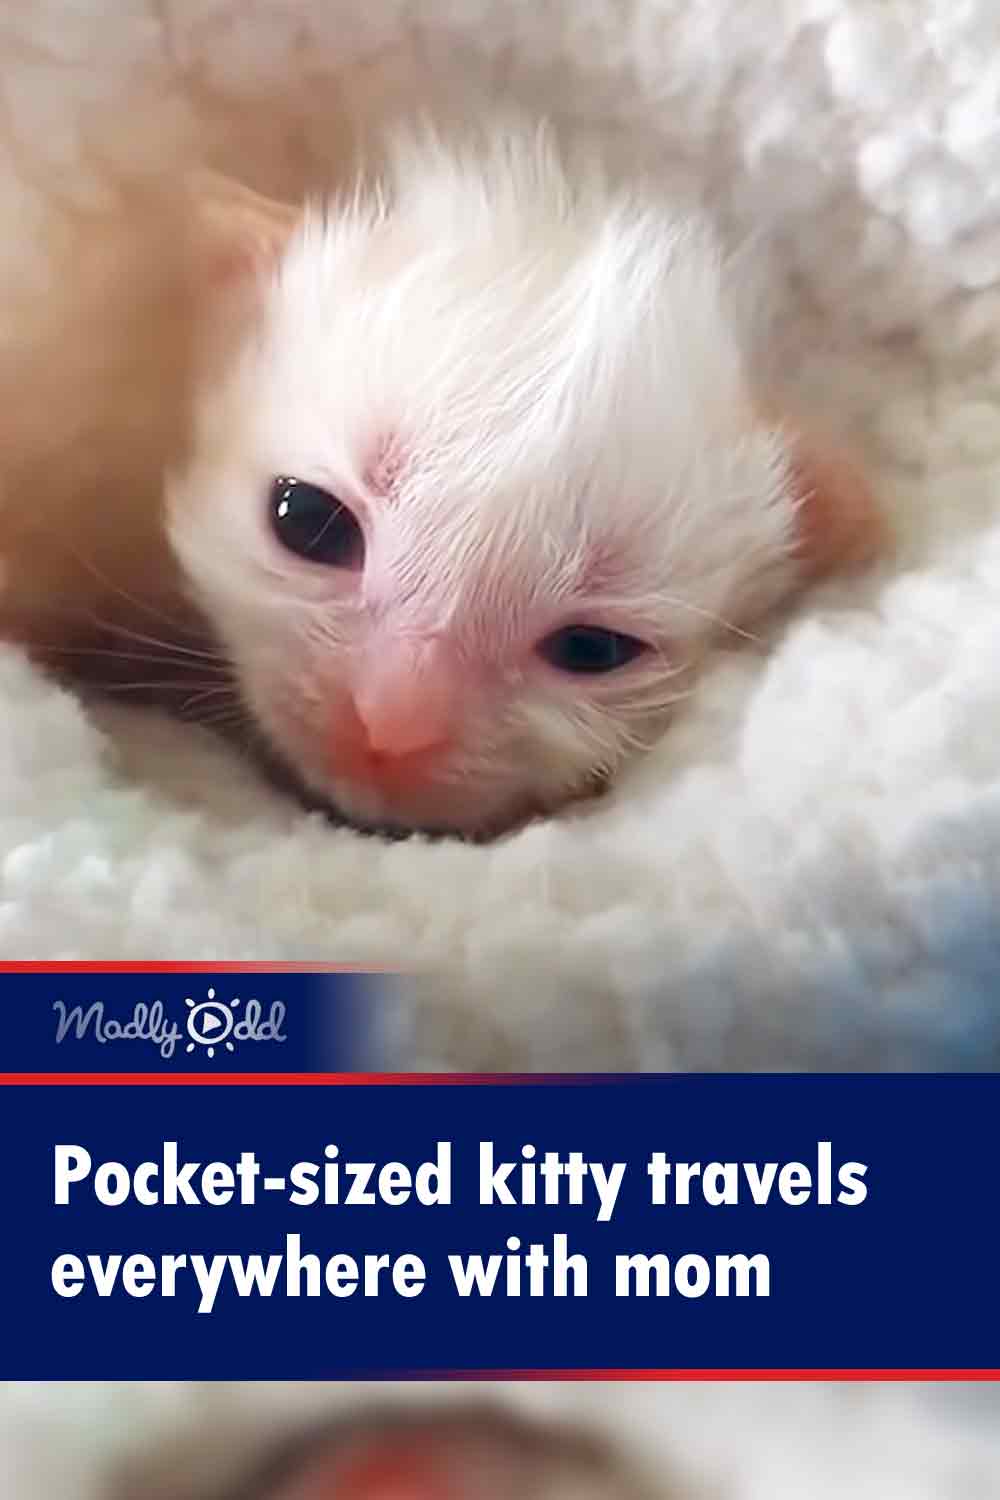 Pocket-sized kitty travels everywhere with mom